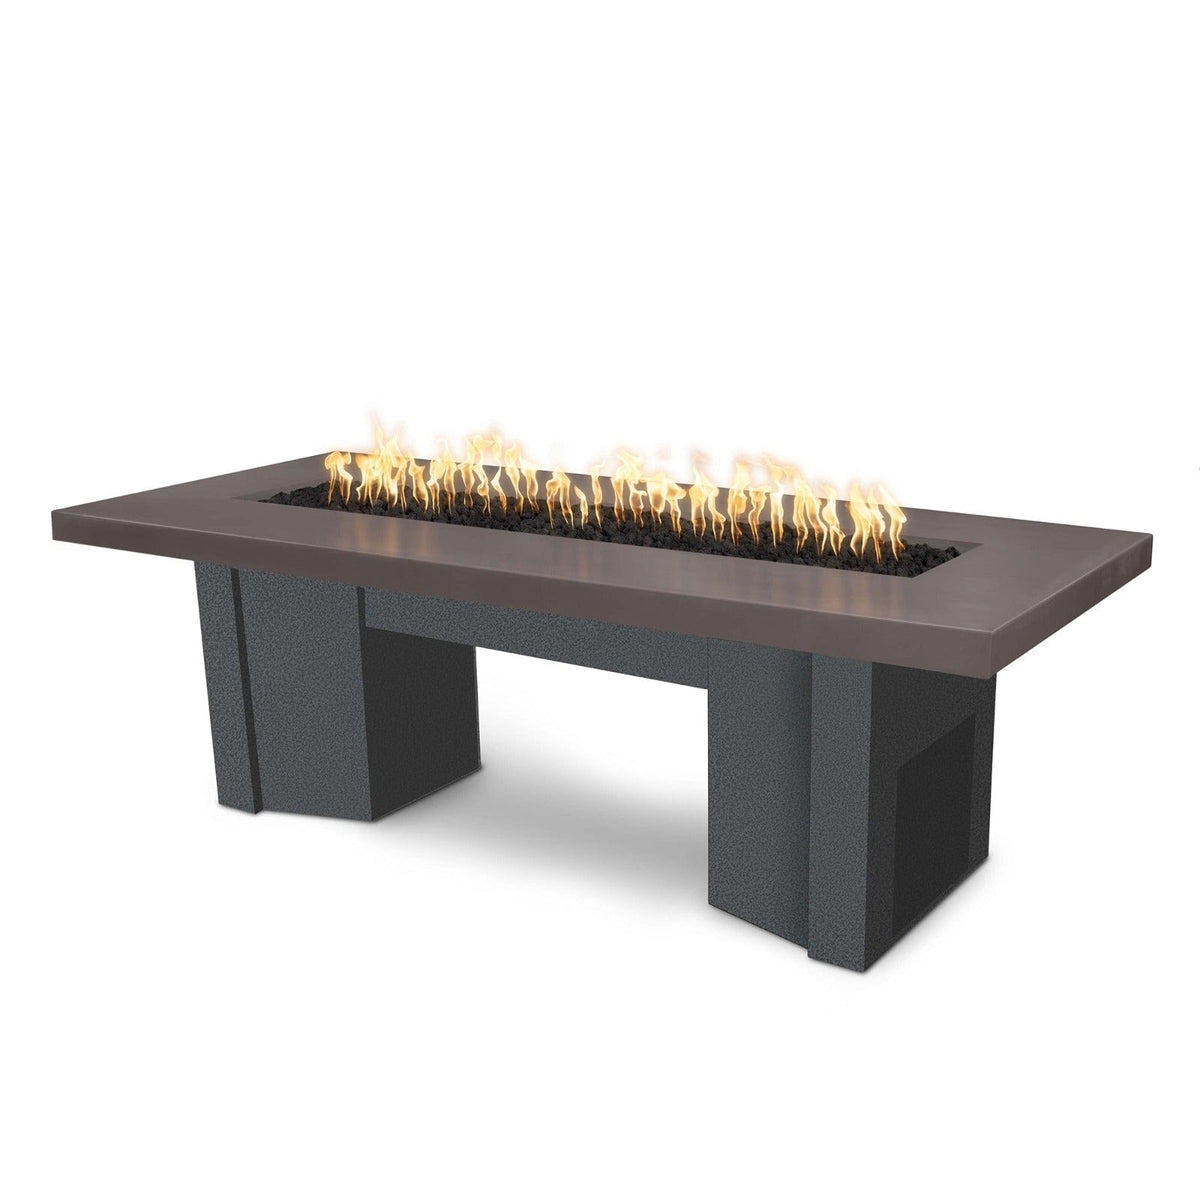 The Outdoor Plus Fire Features Chestnut (-CST) / Silver Vein Powder Coated Steel (-SLV) The Outdoor Plus 78&quot; Alameda Fire Table Smooth Concrete in Natural Gas - Flame Sense System with Push Button Spark Igniter / OPT-ALMGFRC78FSEN-NG